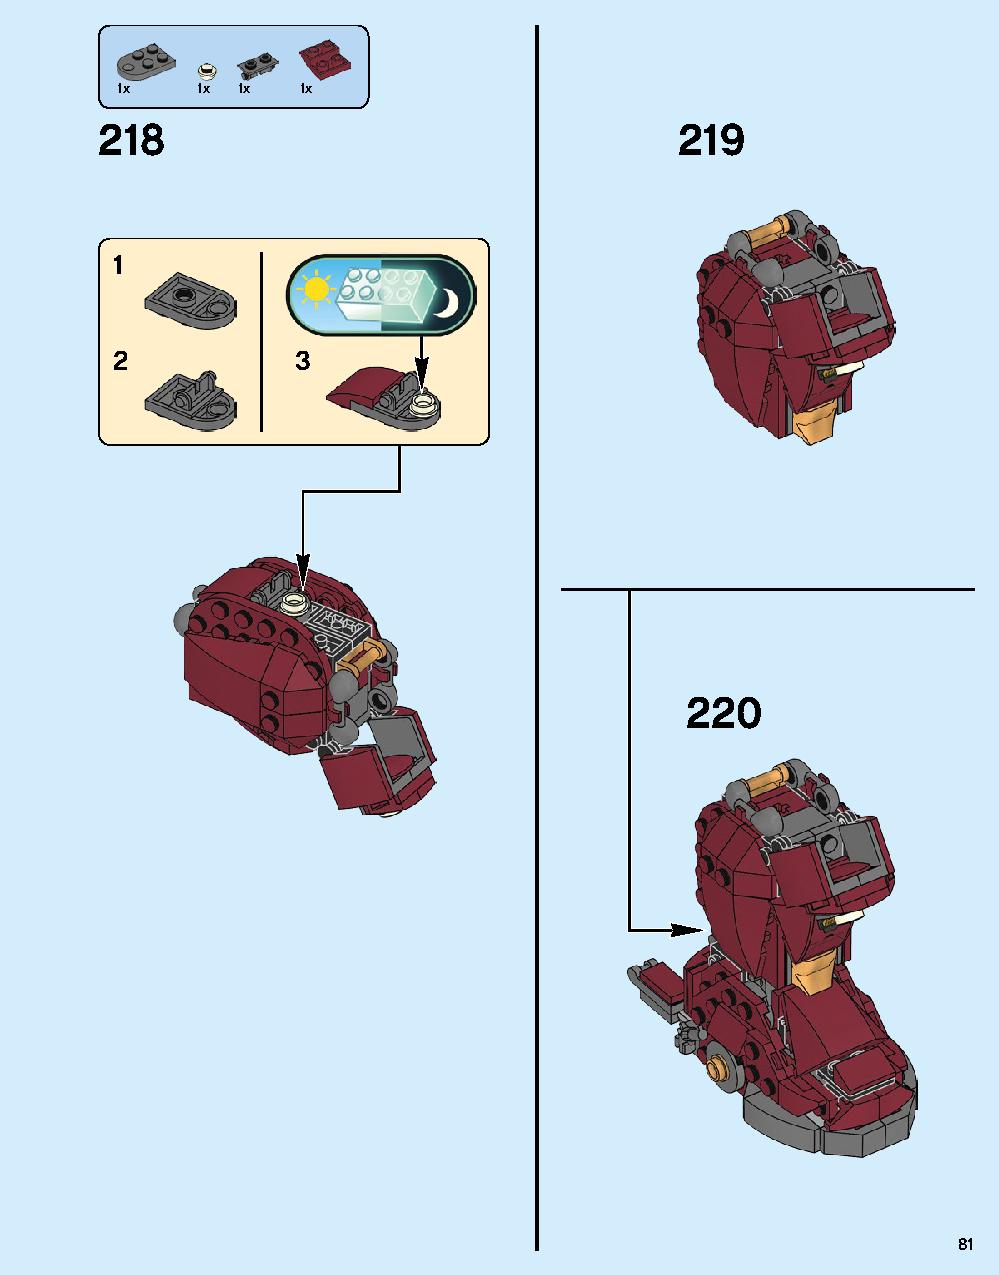 The Hulkbuster: Ultron Edition 76105 LEGO information LEGO instructions 81 page